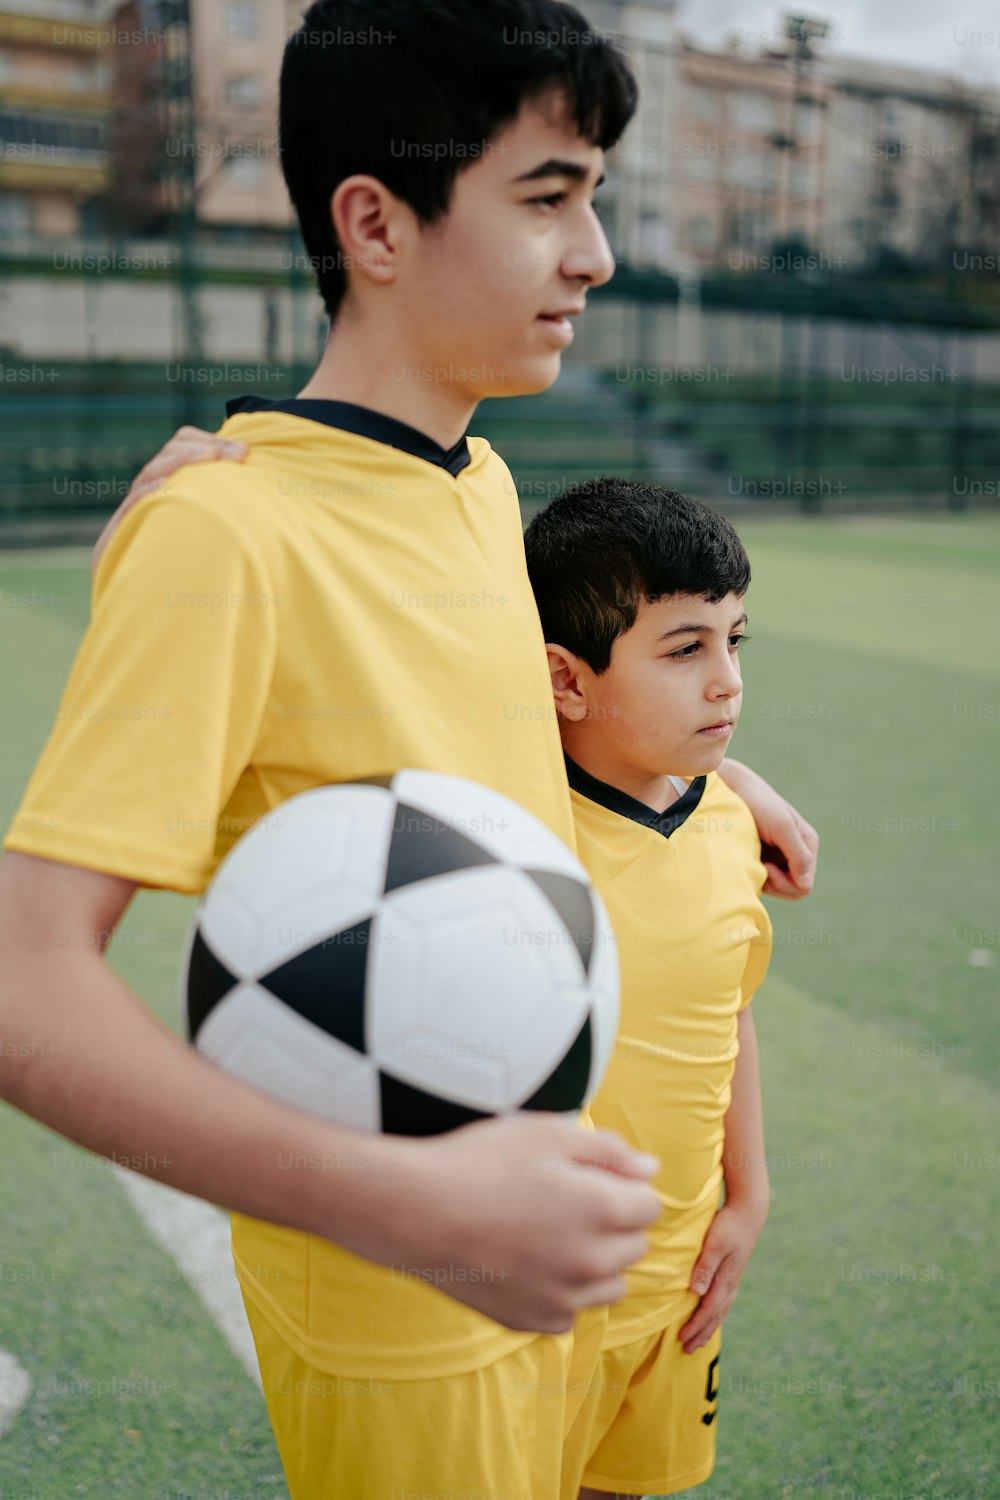 two young boys standing next to each other holding a soccer ball